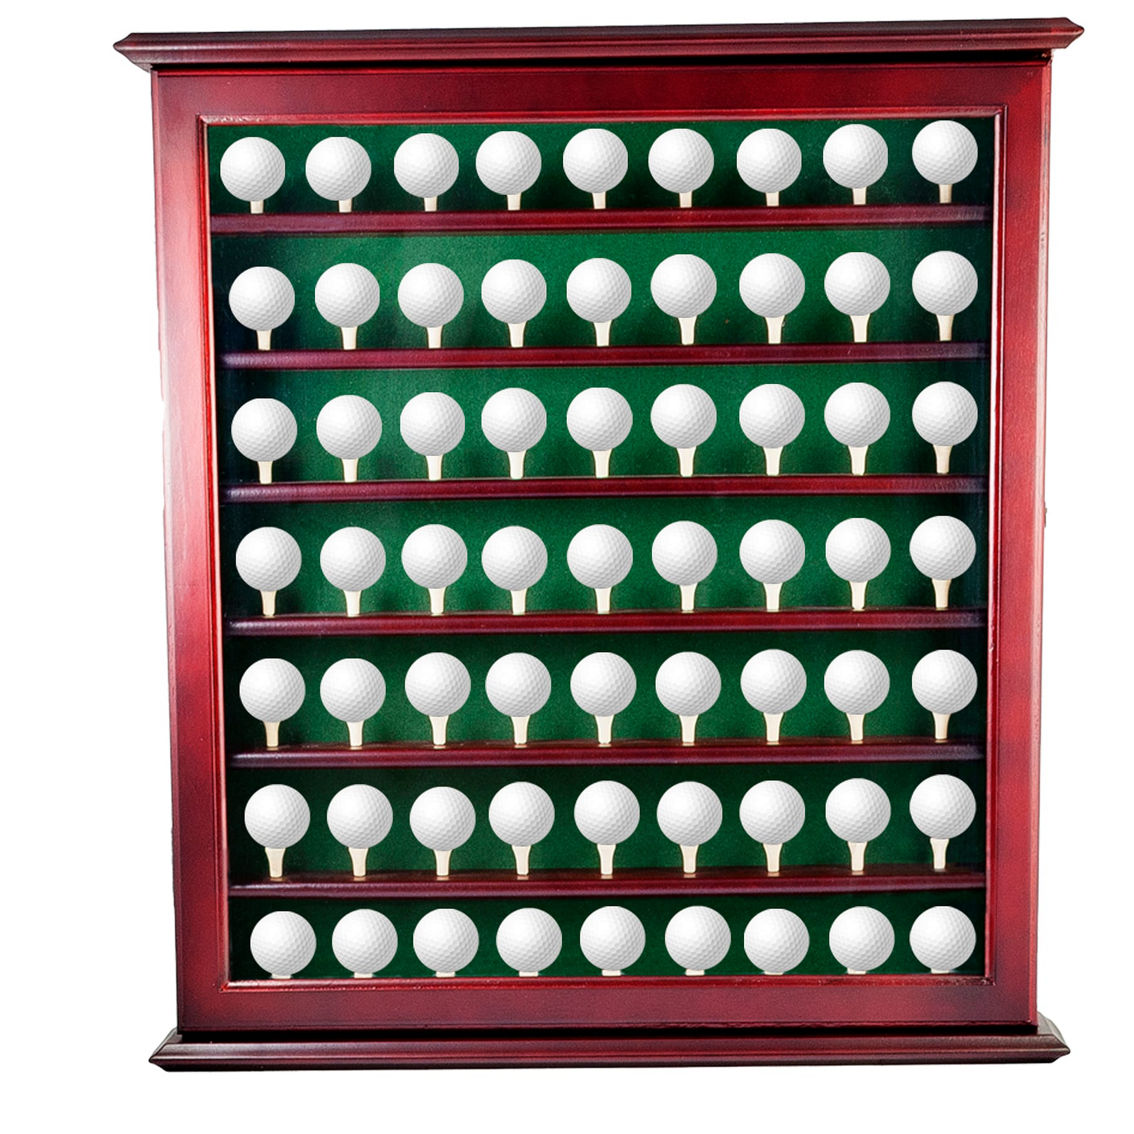 GOLF GIFTS & GALLERY MAH.63 BALL CABINET W/ACRYL DOOR - Image 4 of 5